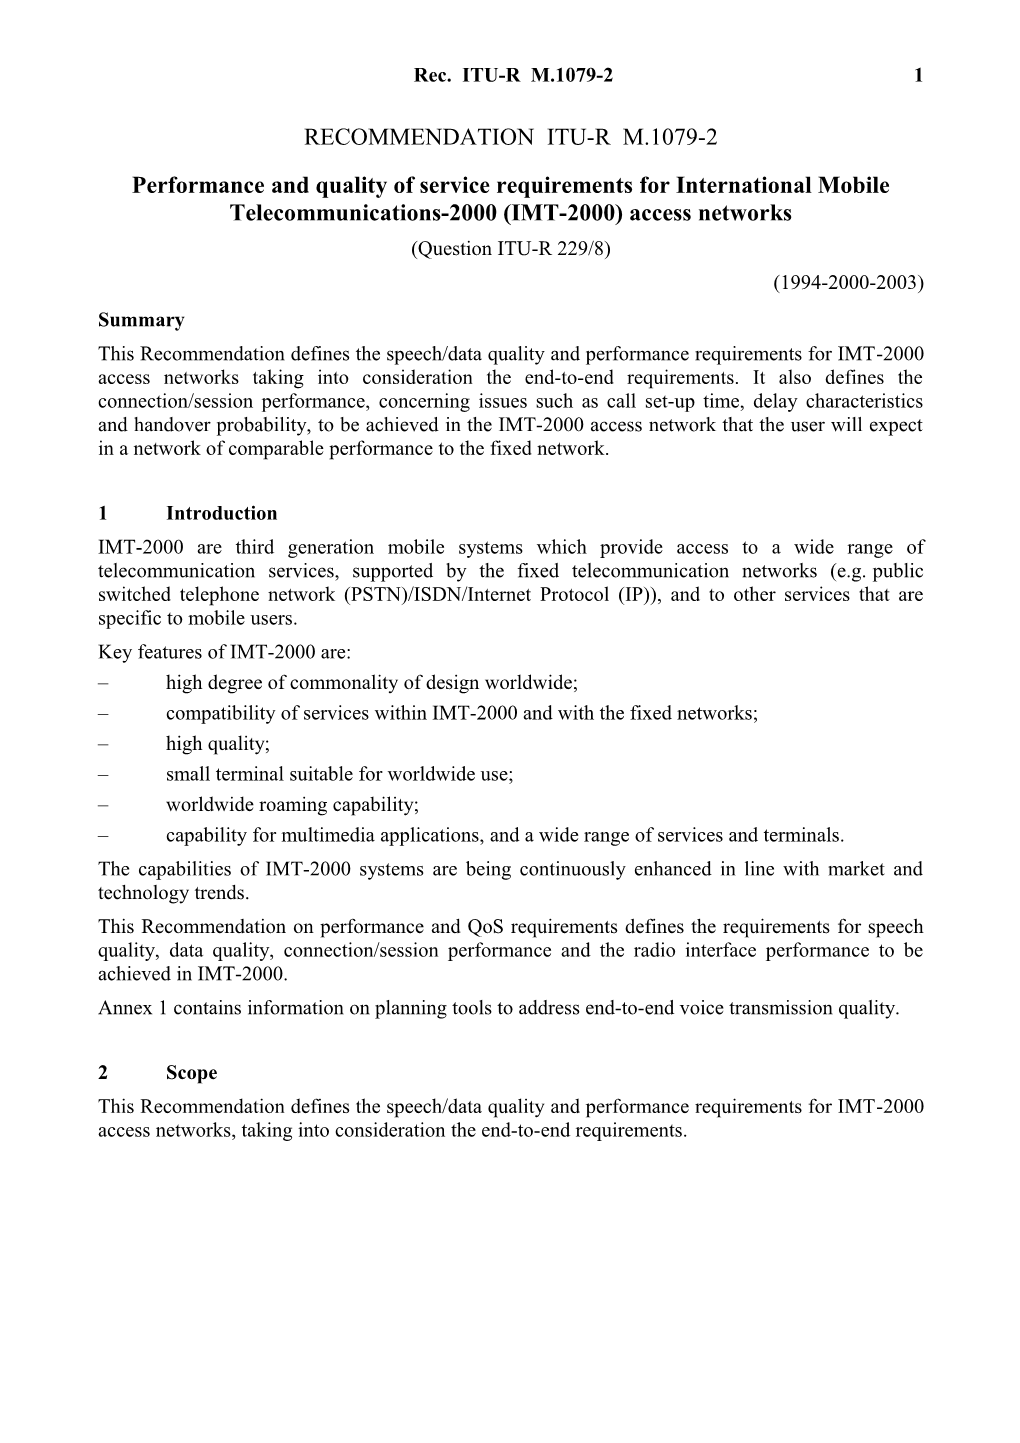 RECOMMENDATION ITU-R M.1079-2 - Performance And Quality Of Service Requirements For International Mobile Telecommunications-2000 (IMT-2000) Access Networks